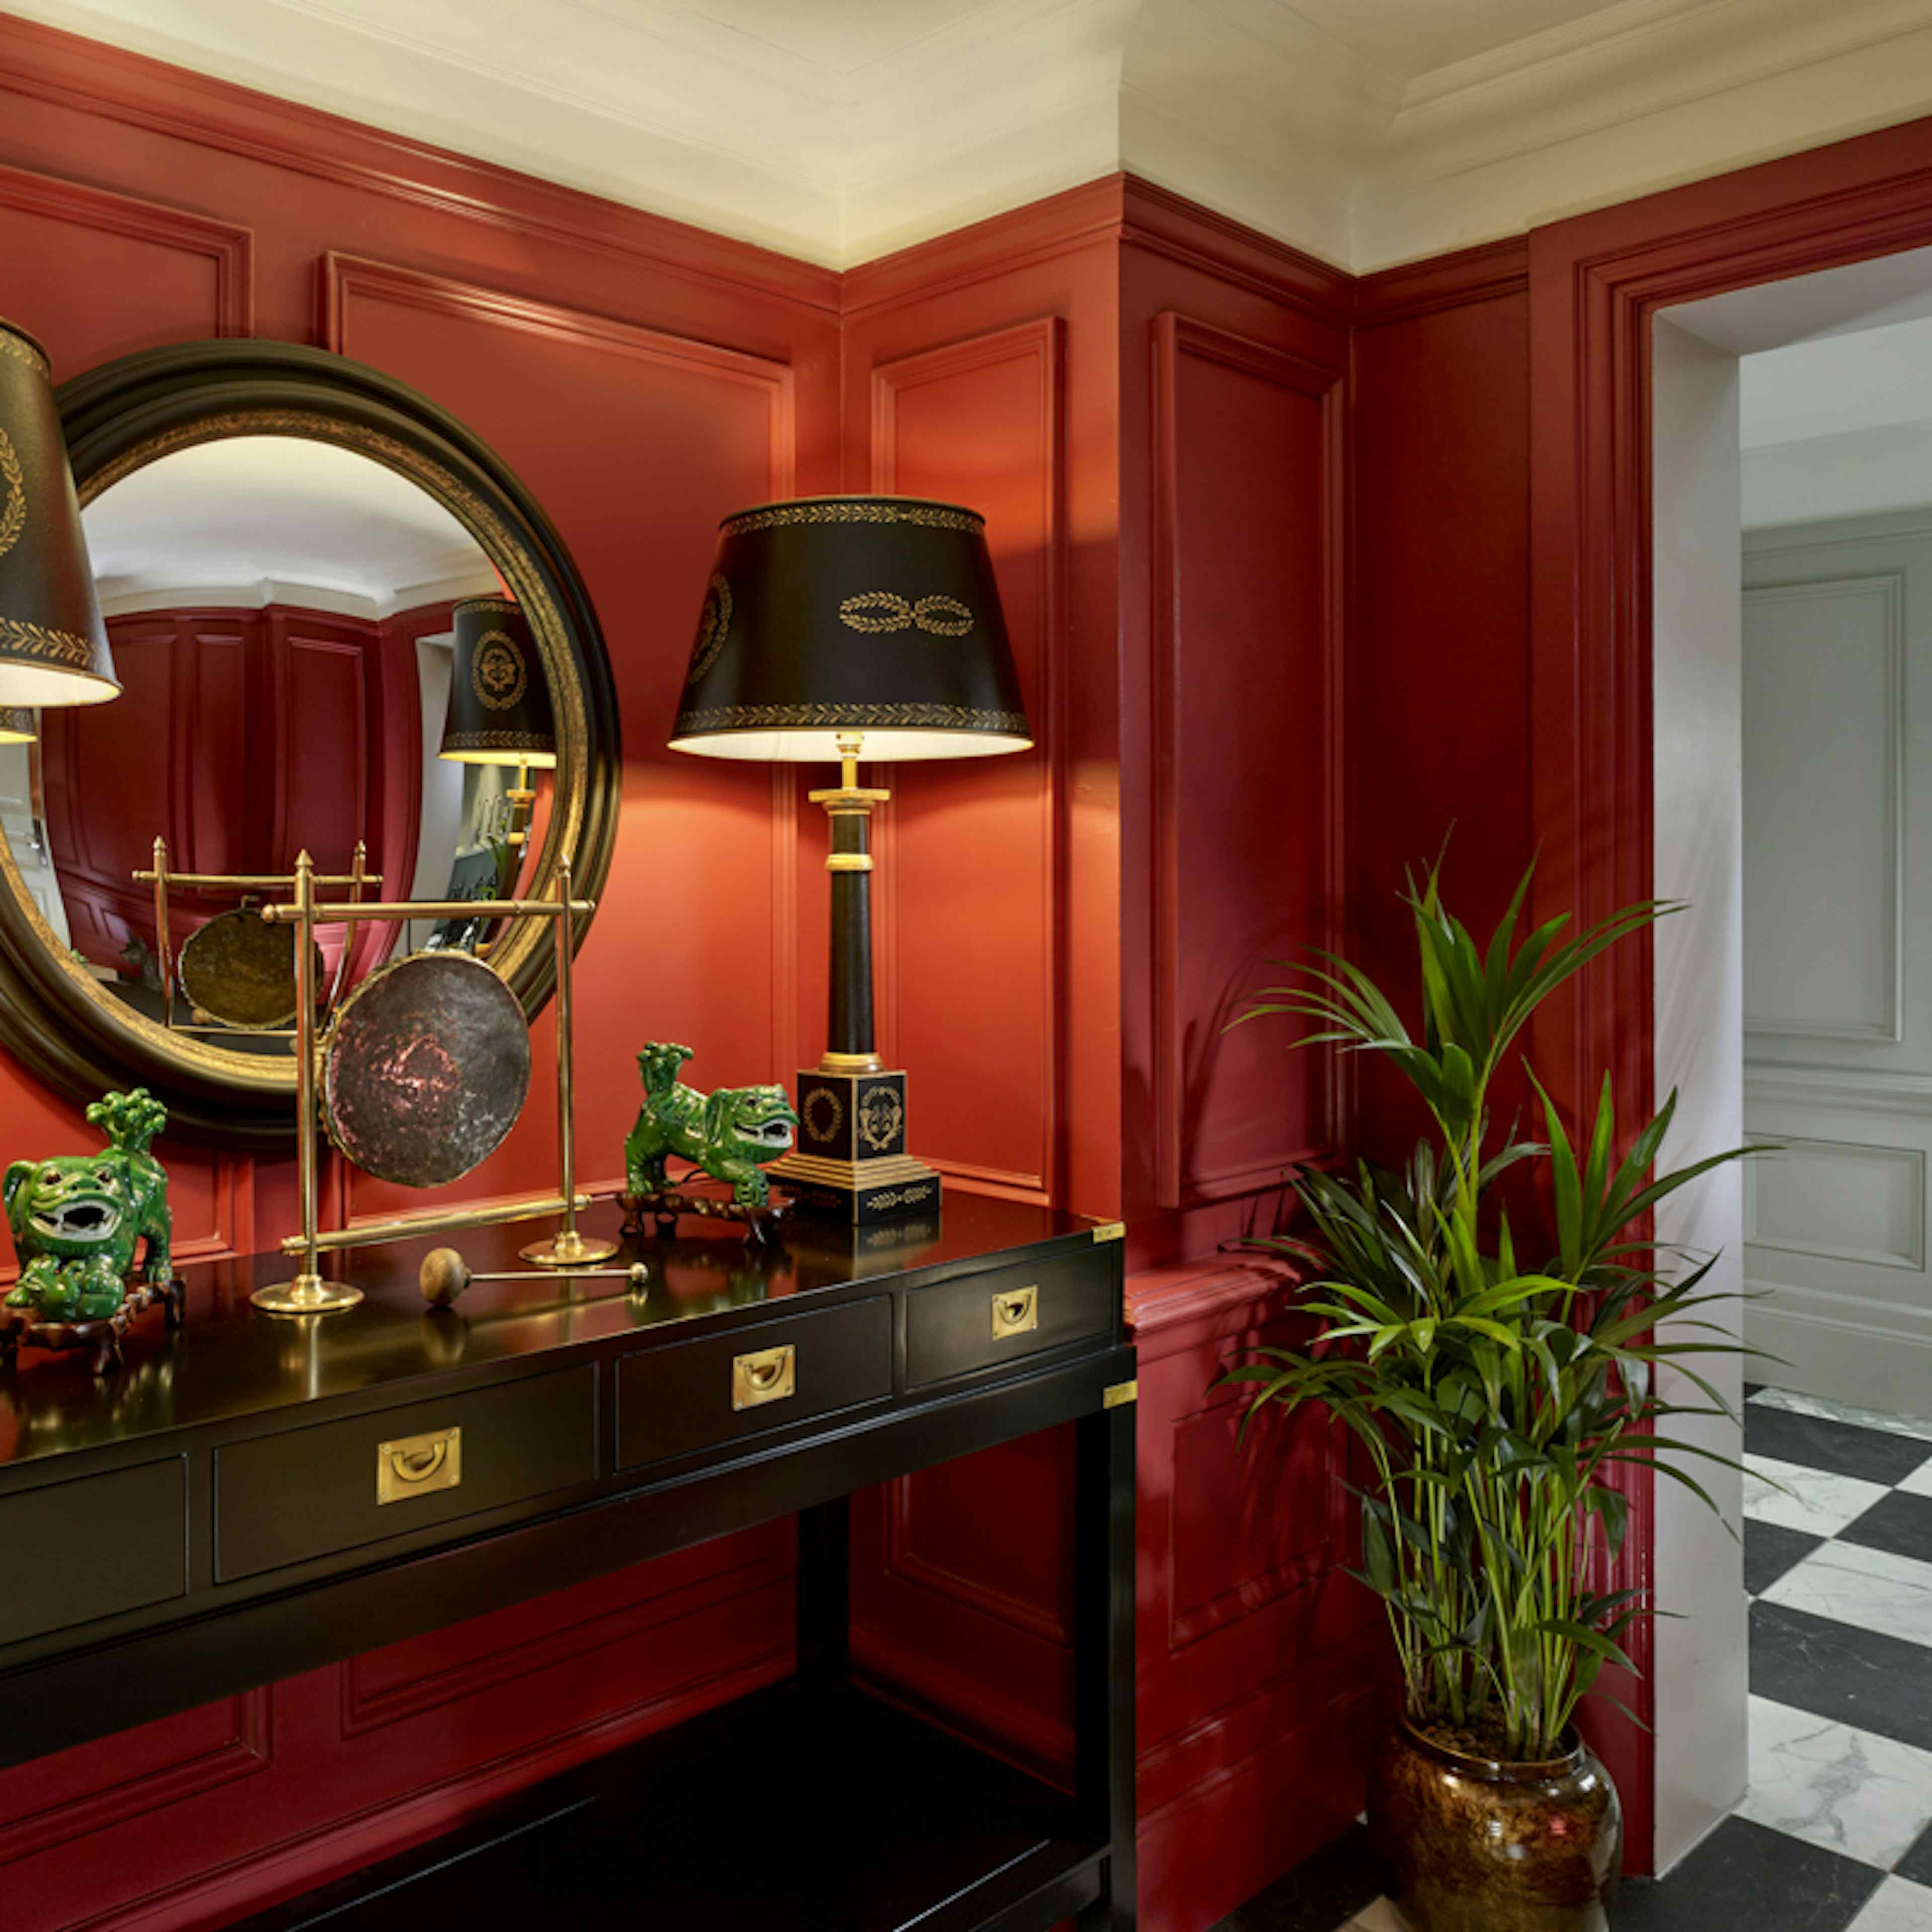 The Residence at Holmes Hotel London - The Residence image 2